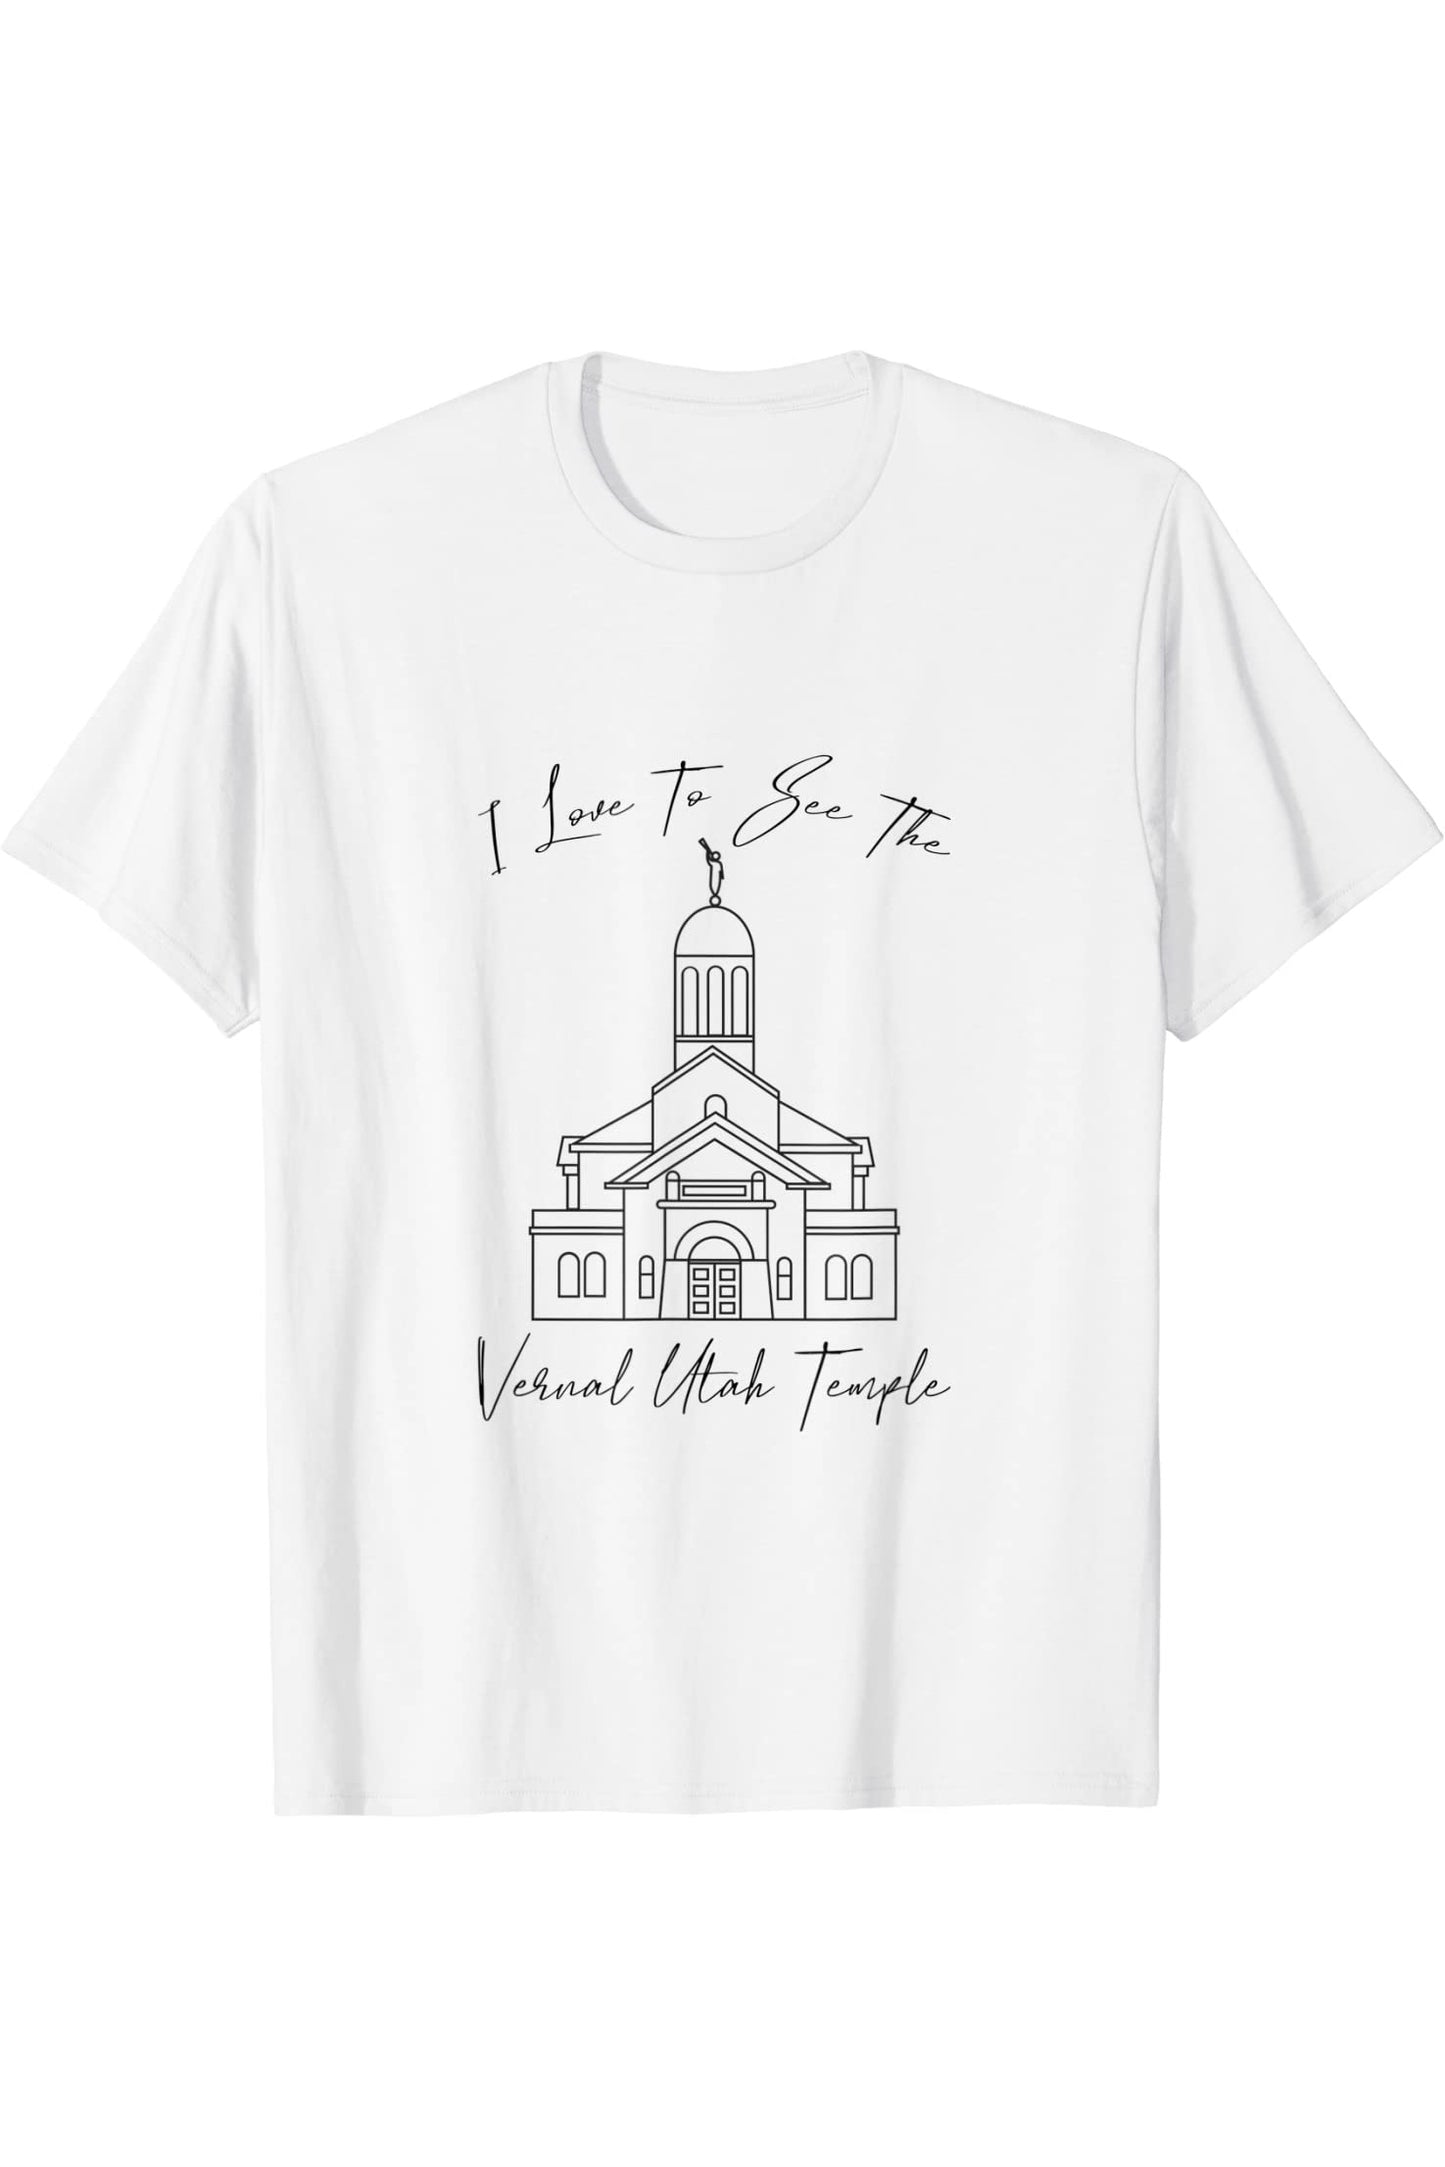 Temple Vernal Utah, I love to see my temple, calligraphie T-Shirt